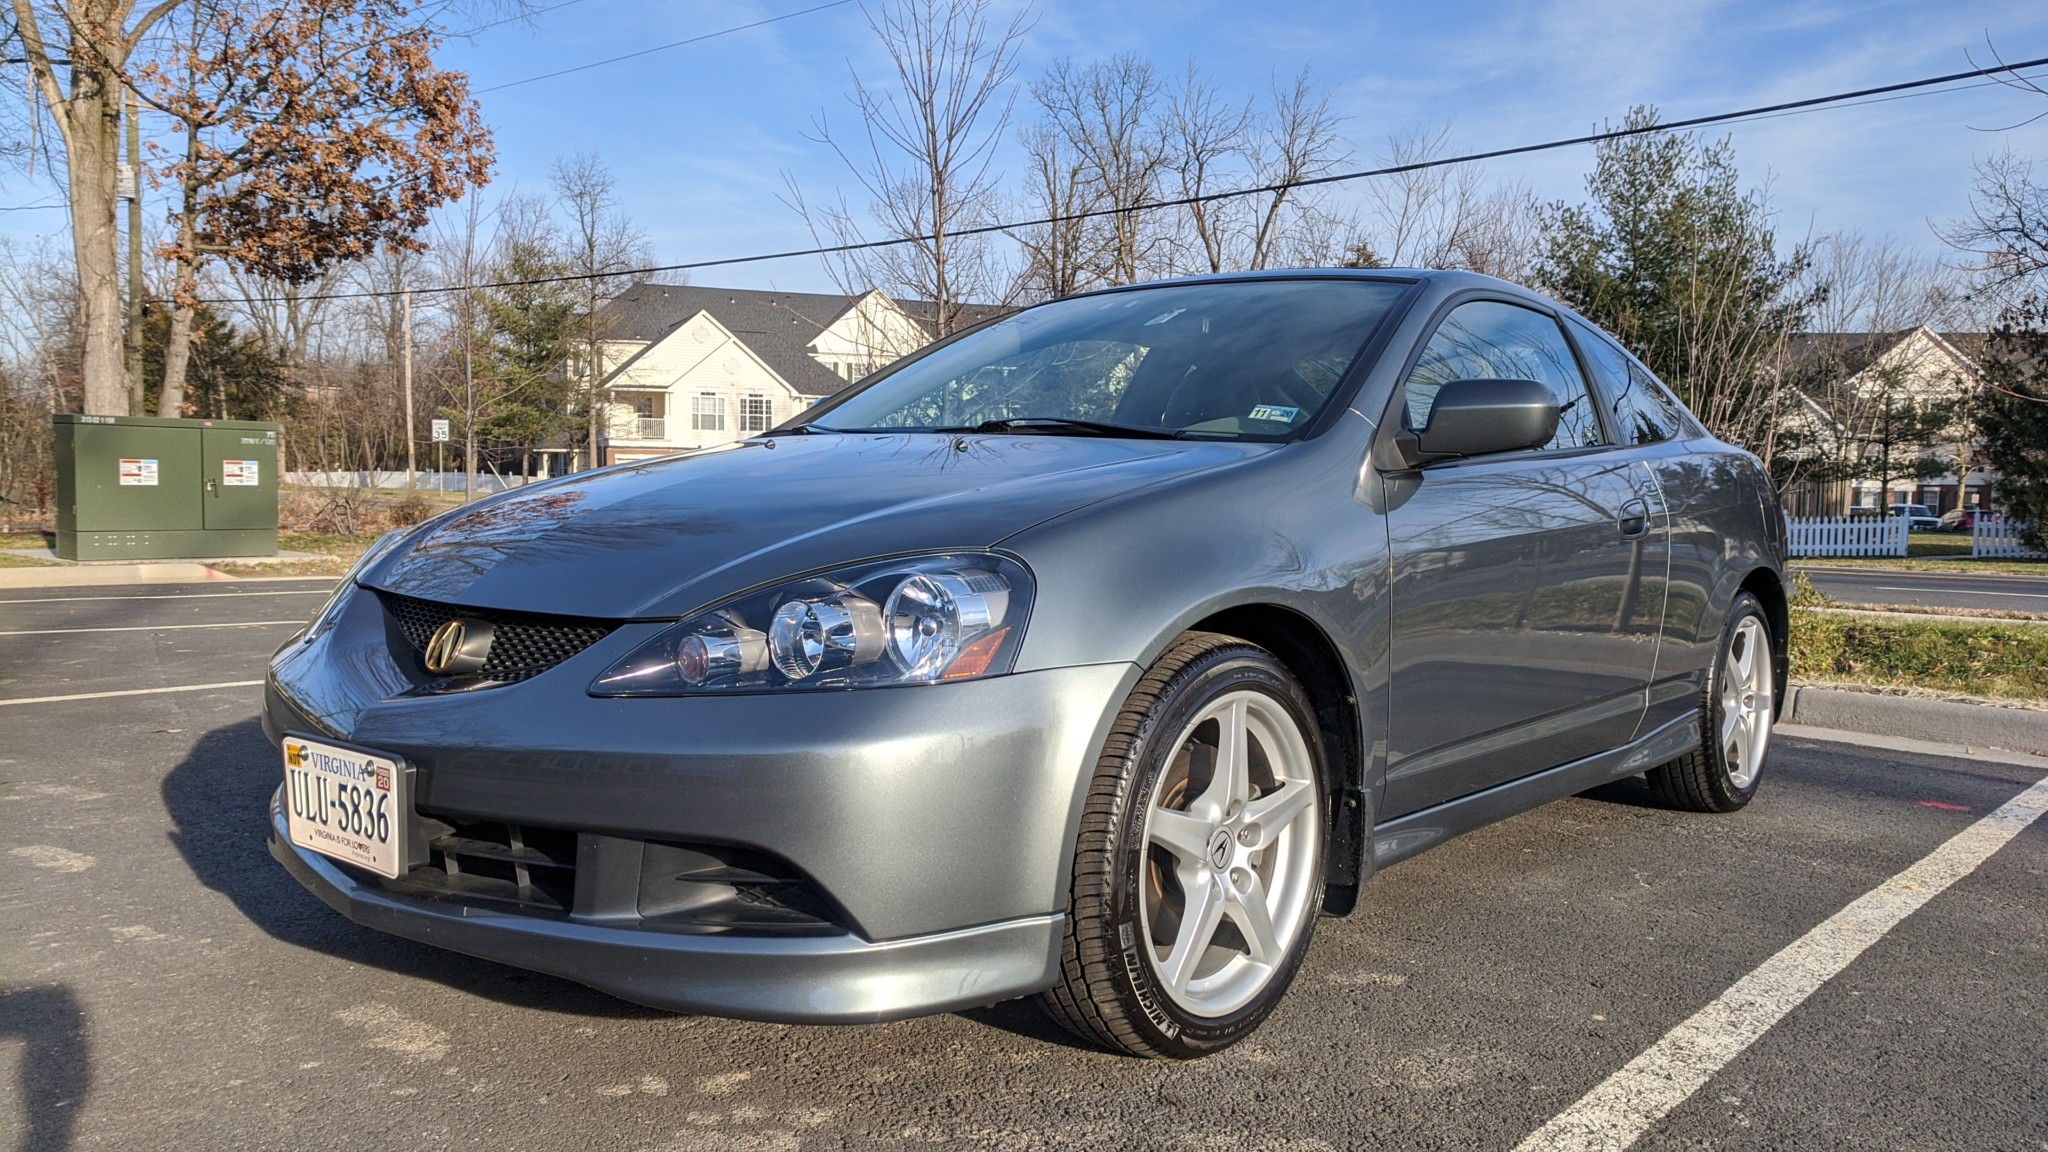 The 06 Acura Rsx Type S Was One Of The Finest Cars From Honda S Golden Era Carscoops